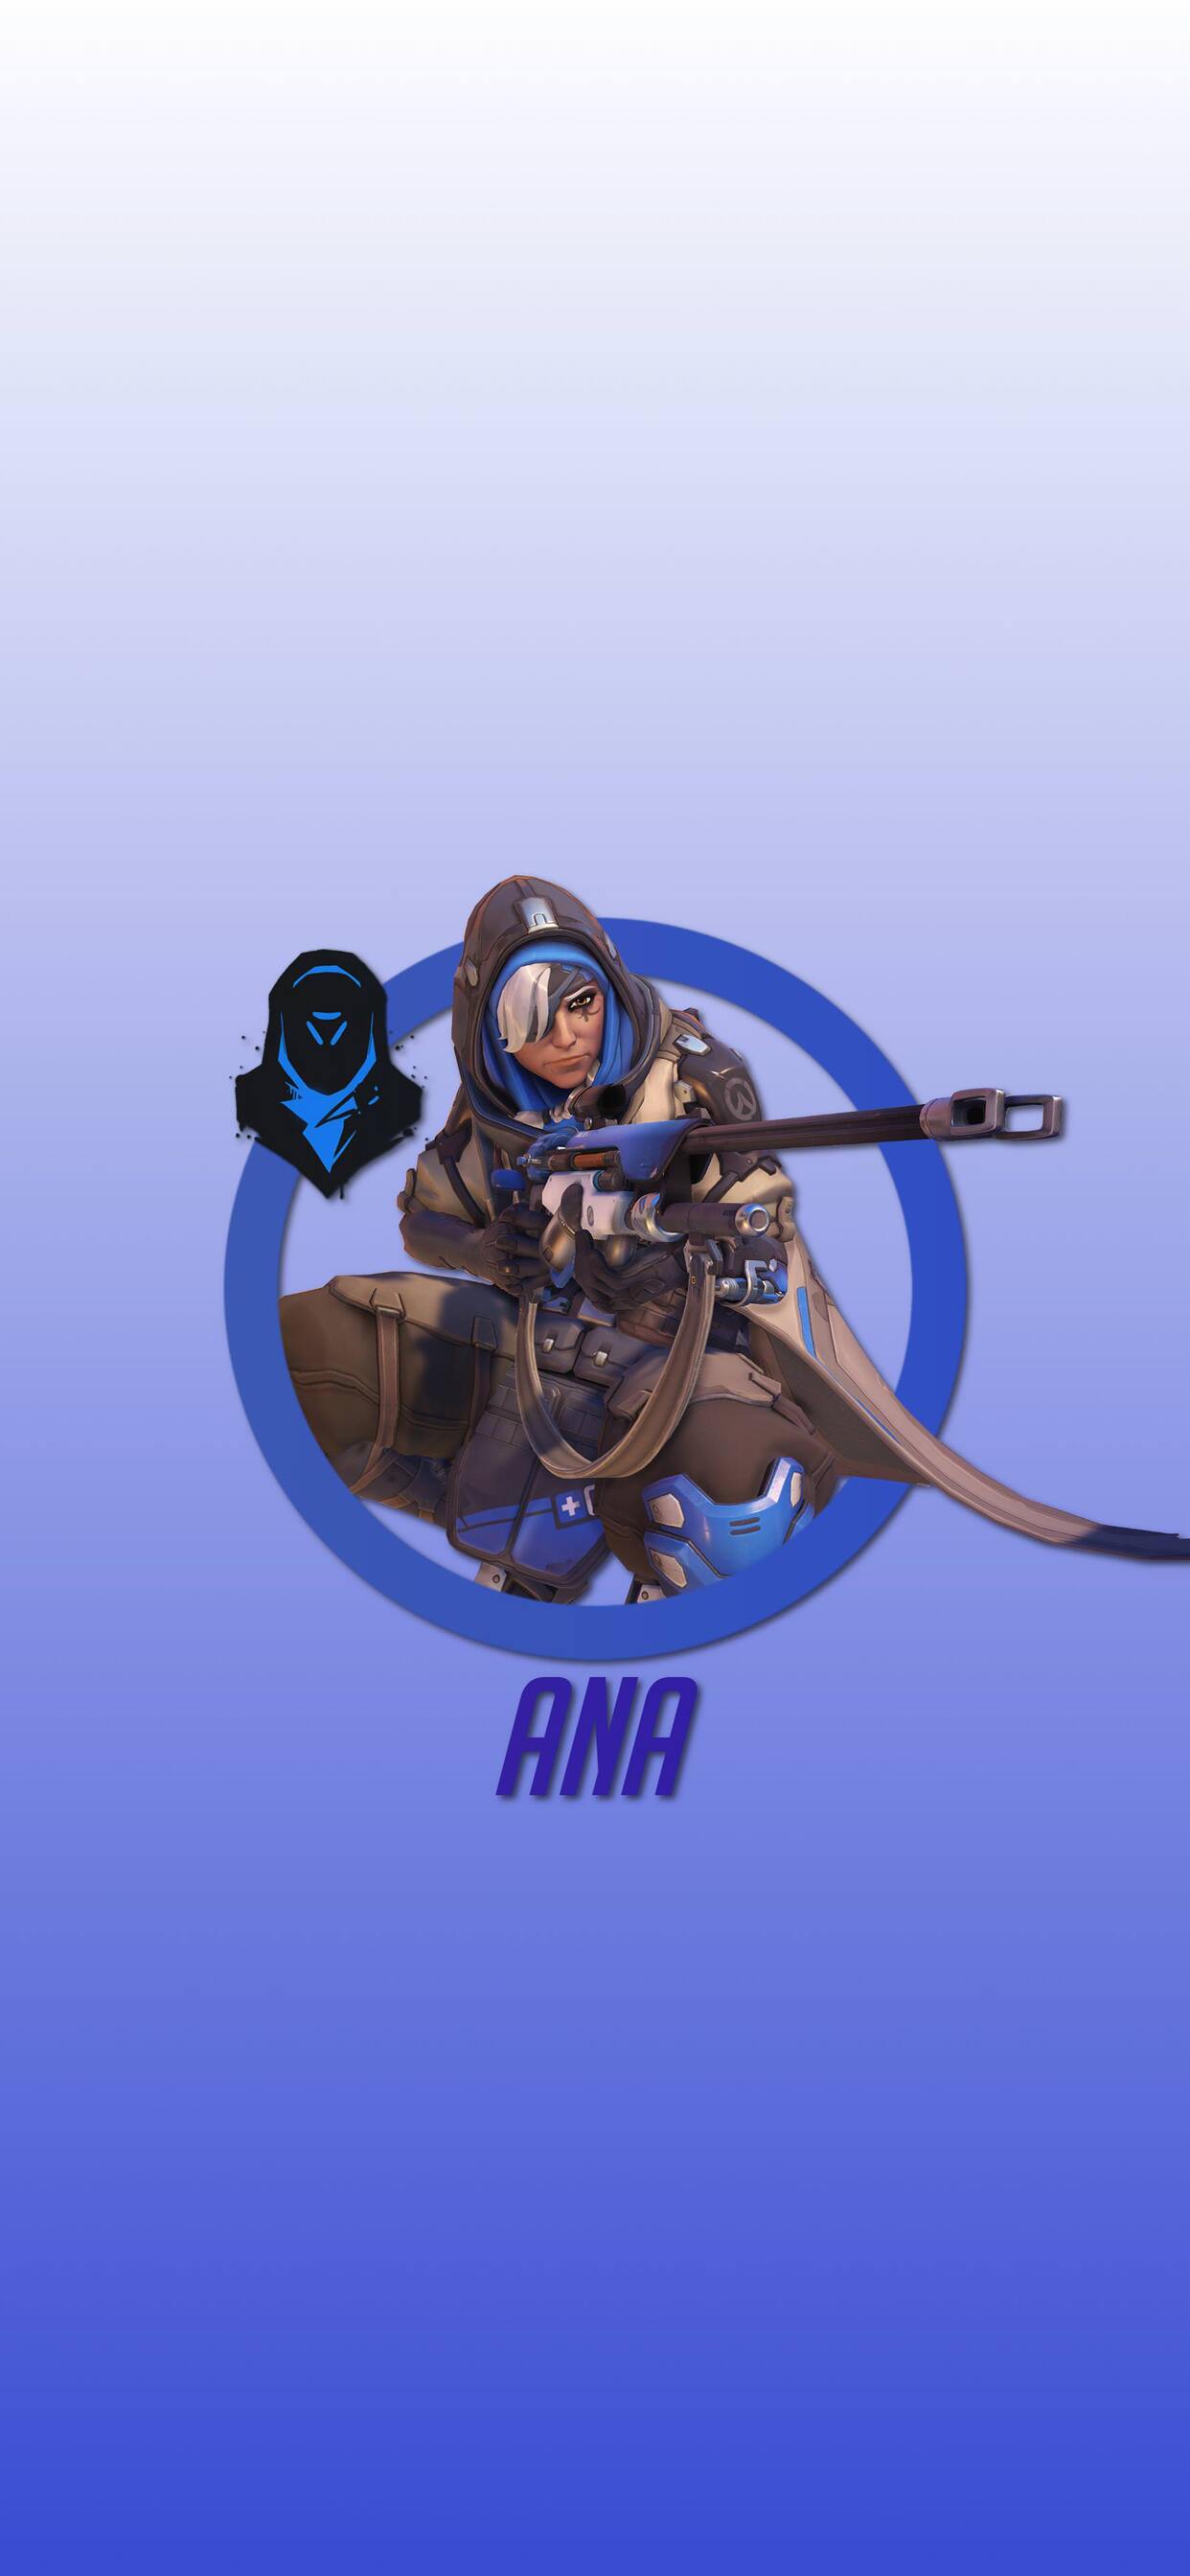 Ana Overwatch Wallpaper Kolpaper Awesome Free Hd Wallpapers